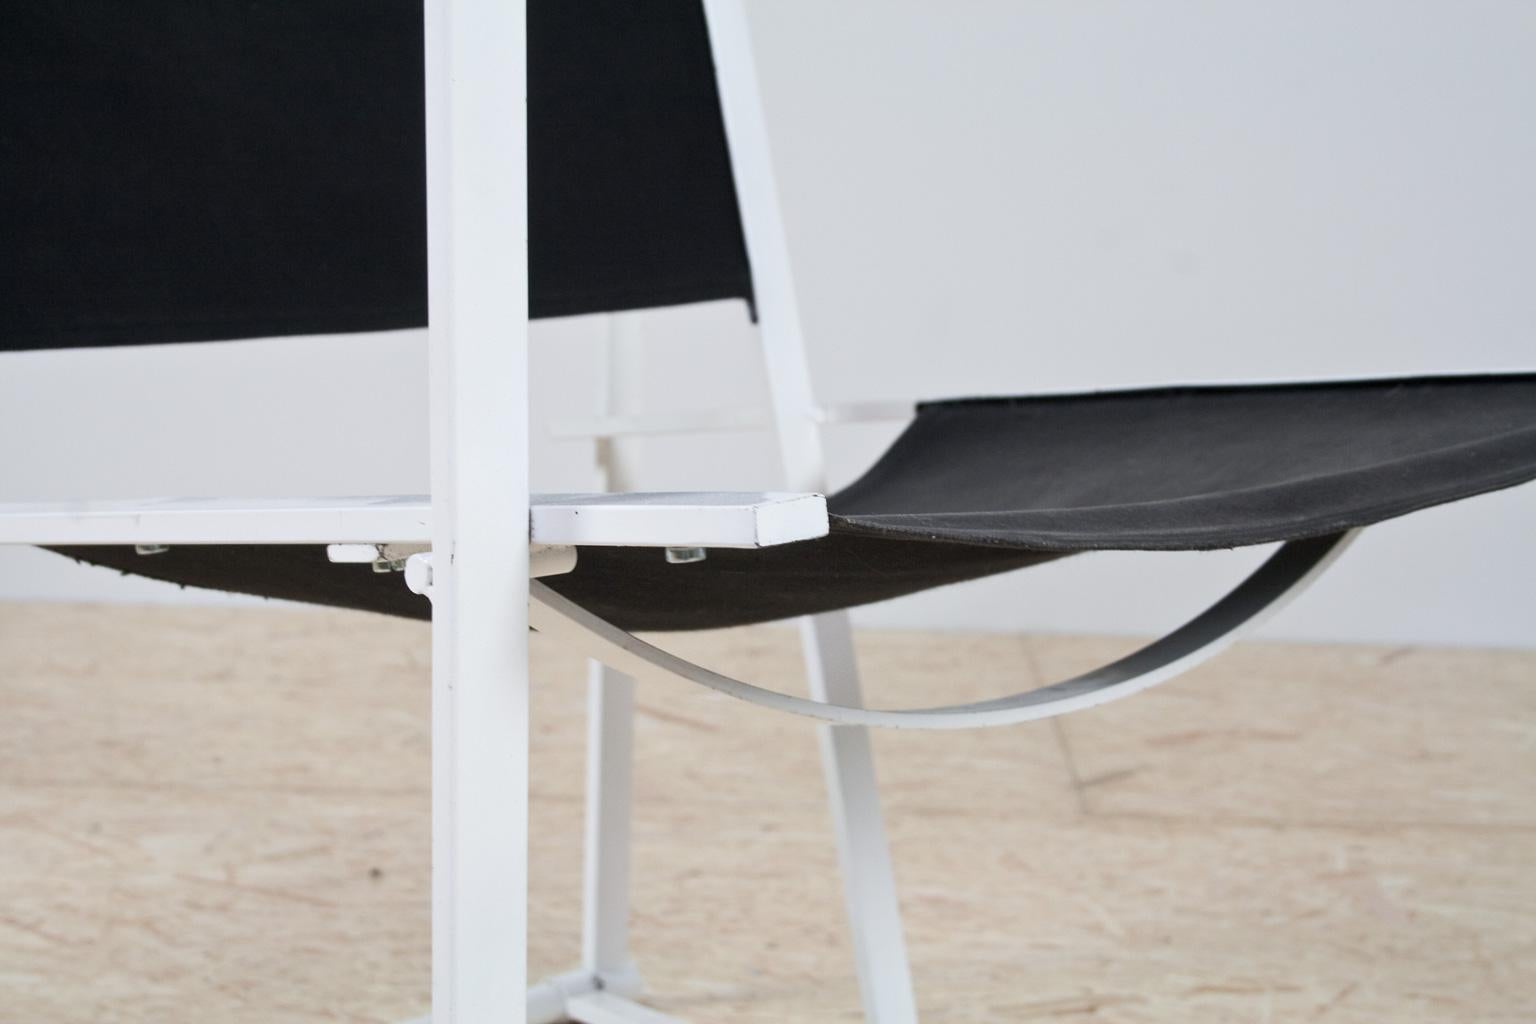 Lacquered Minimalist Armchair in Black and White by Radboud Van Beekum for Pastoe, 1981